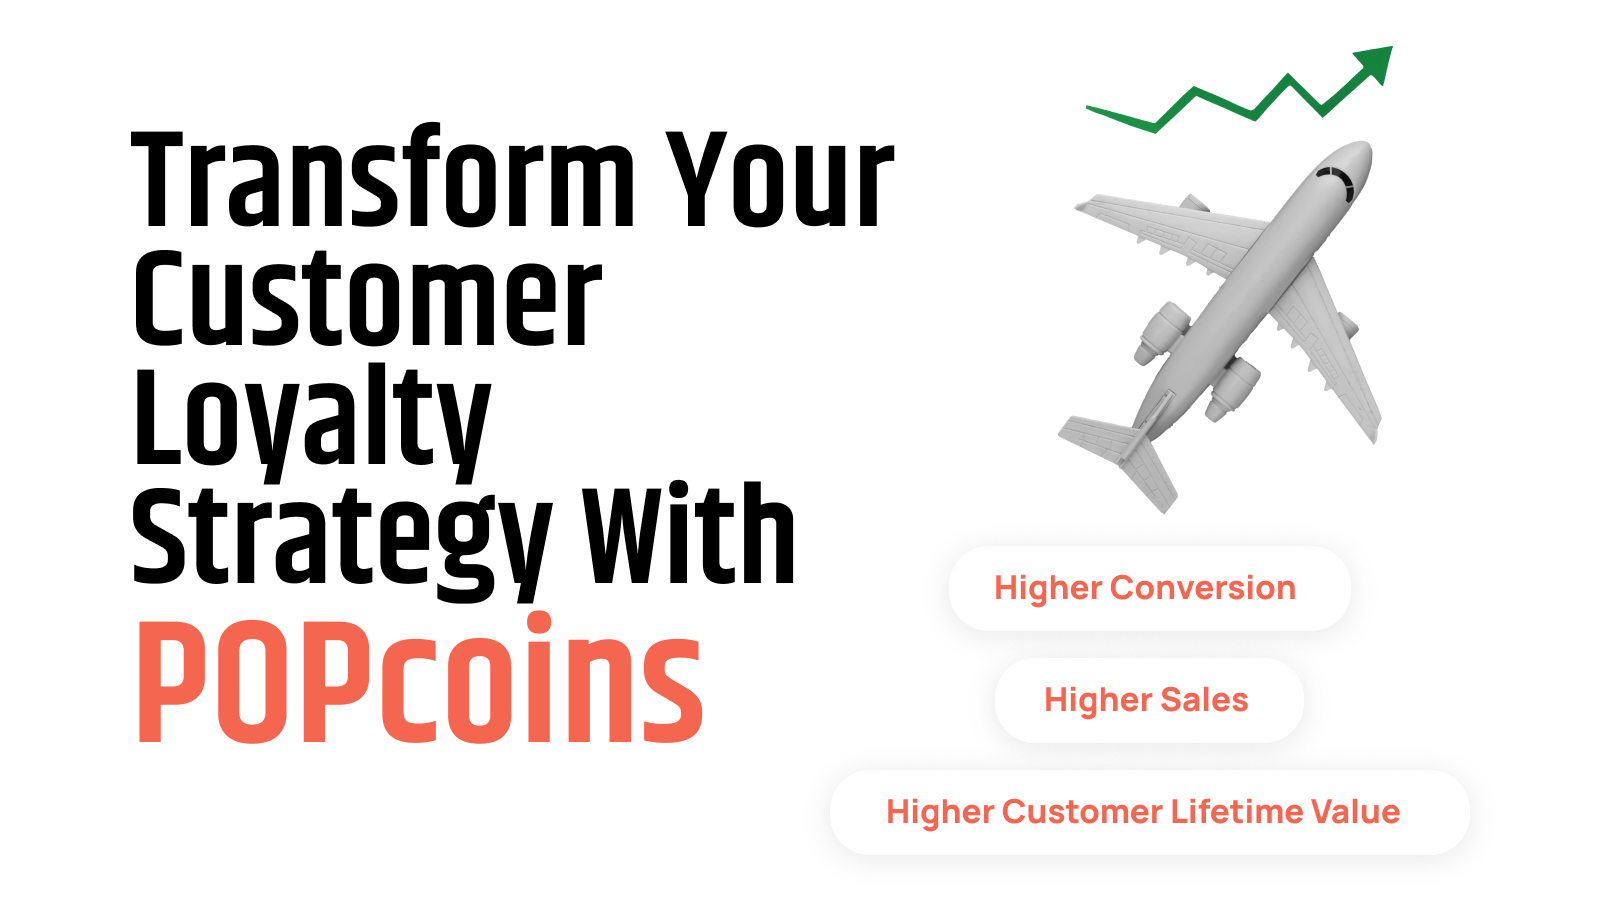 Revolutionise Your Customer Loyalty Strategy with POPcoins